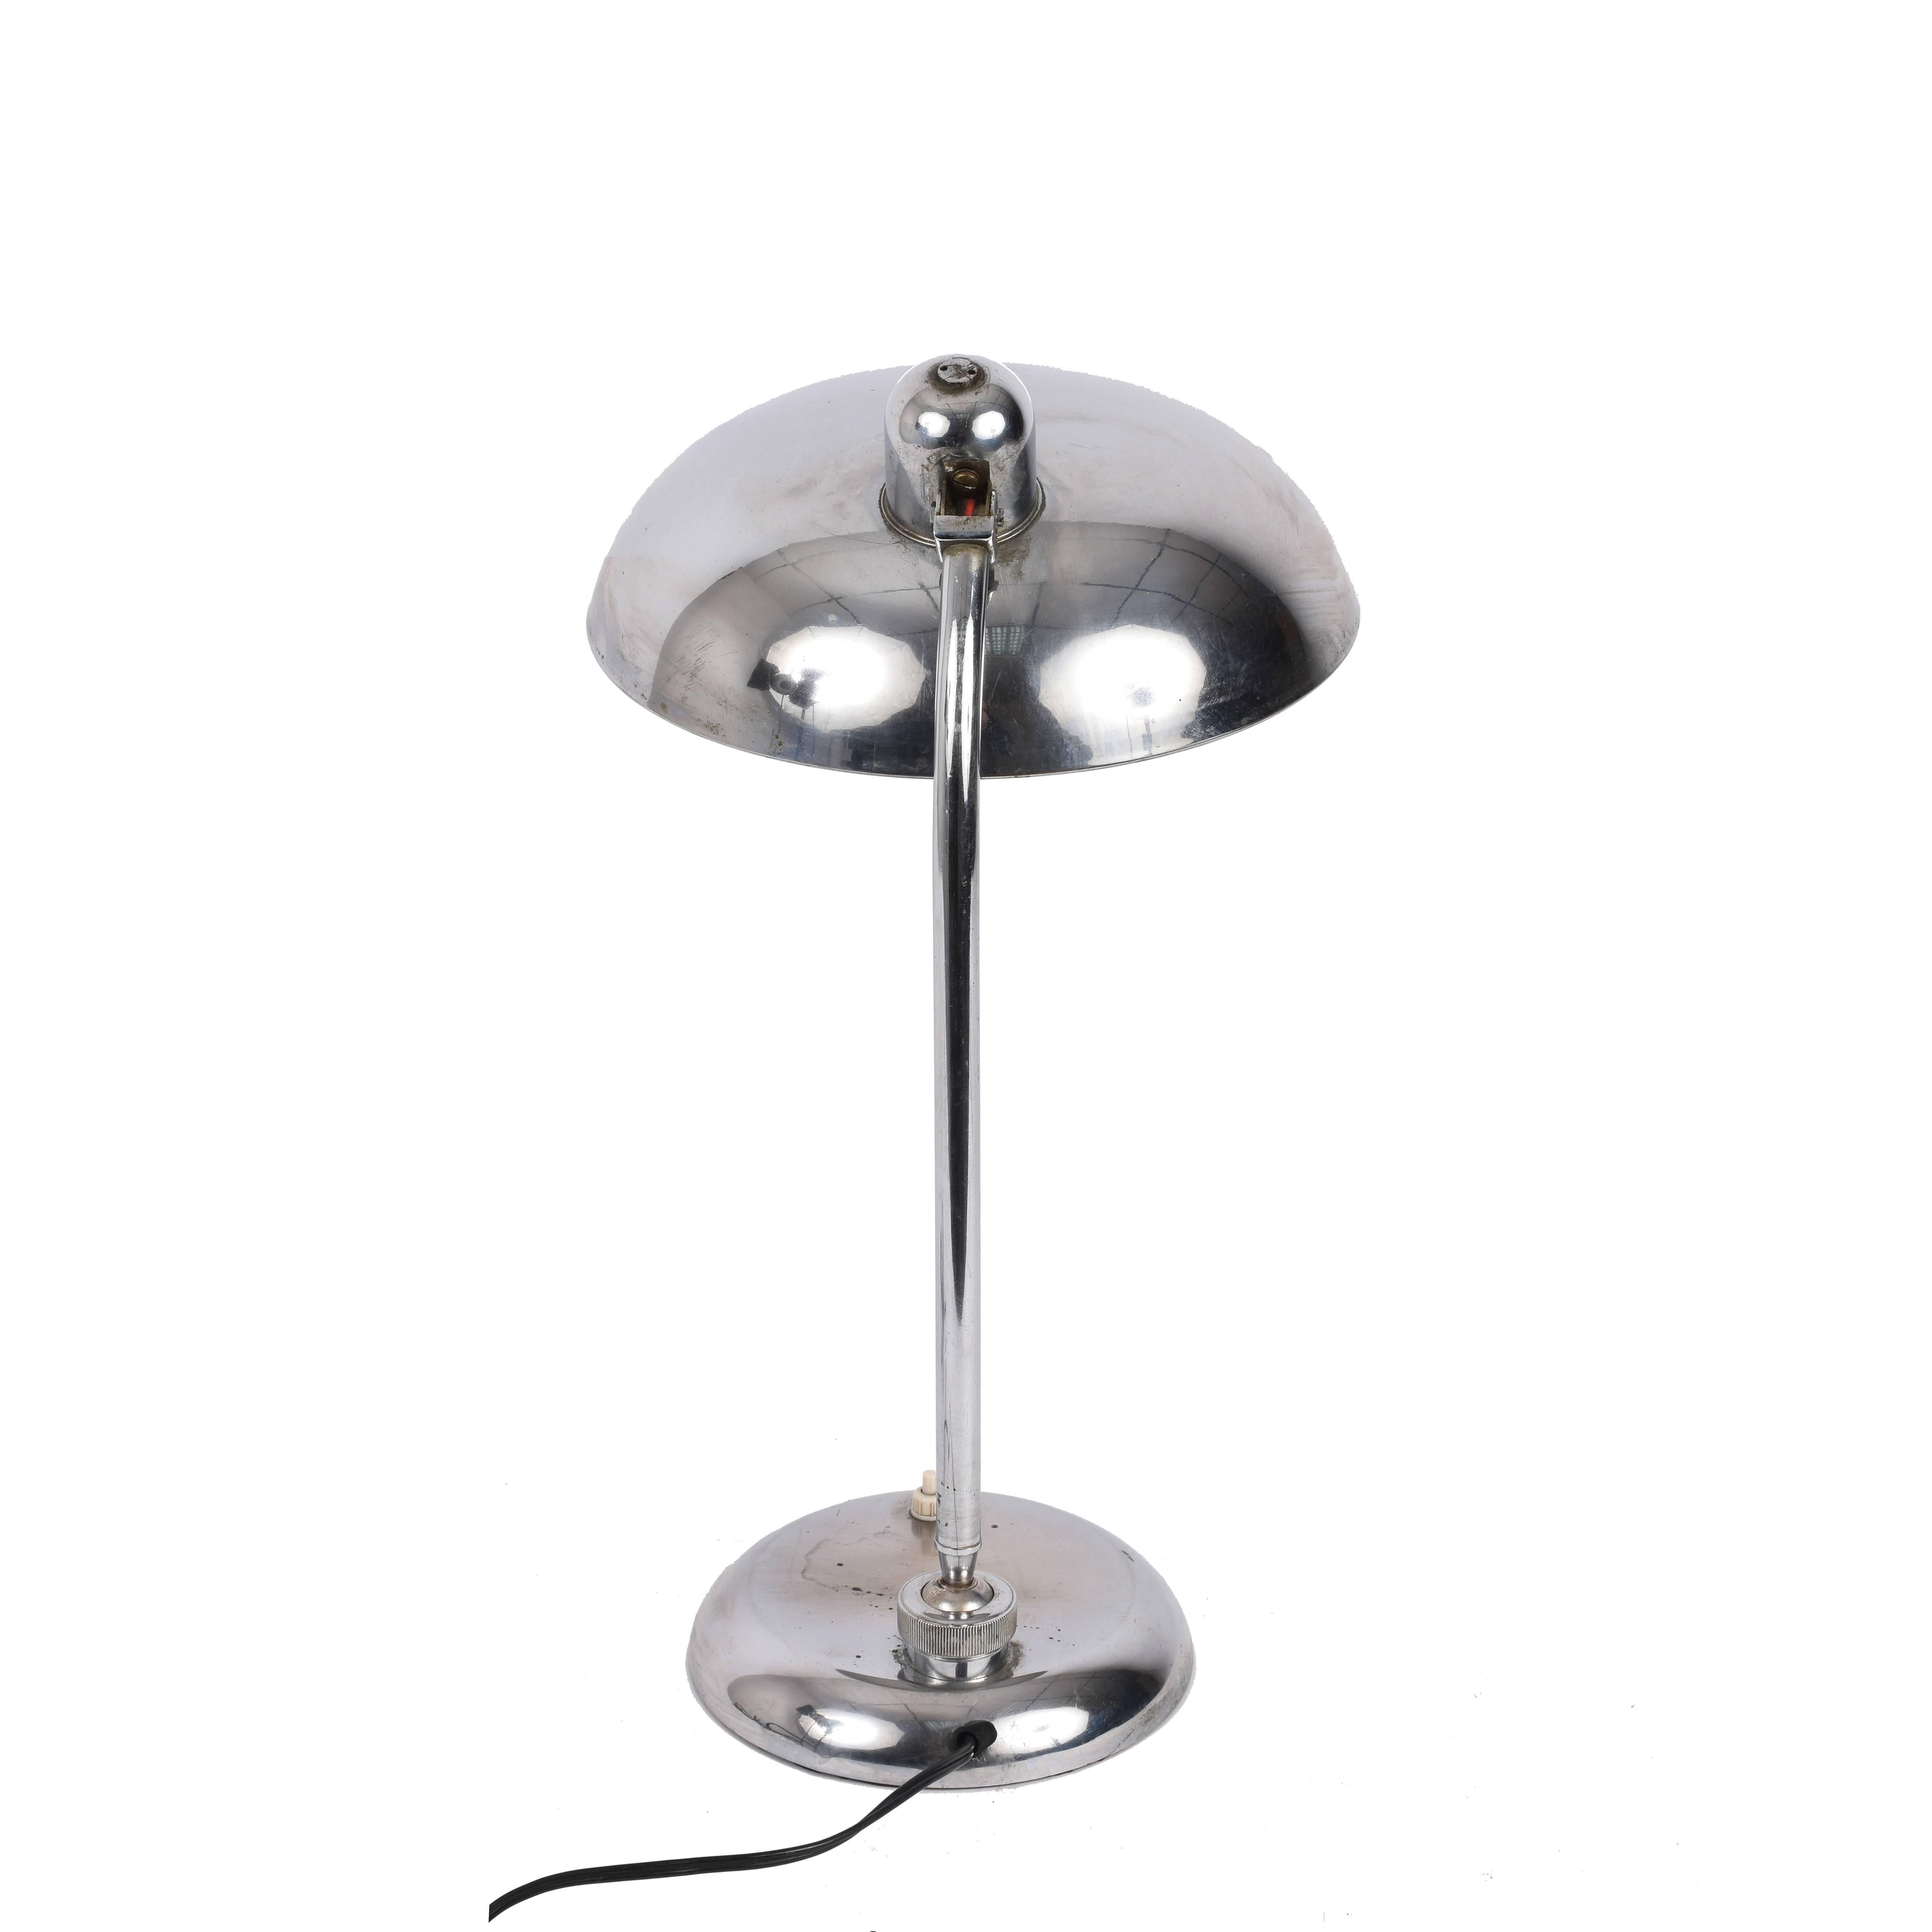 German Bauhaus Steel Table Lamp 1940s Industrial, Attributable to Dell, Lighting For Sale